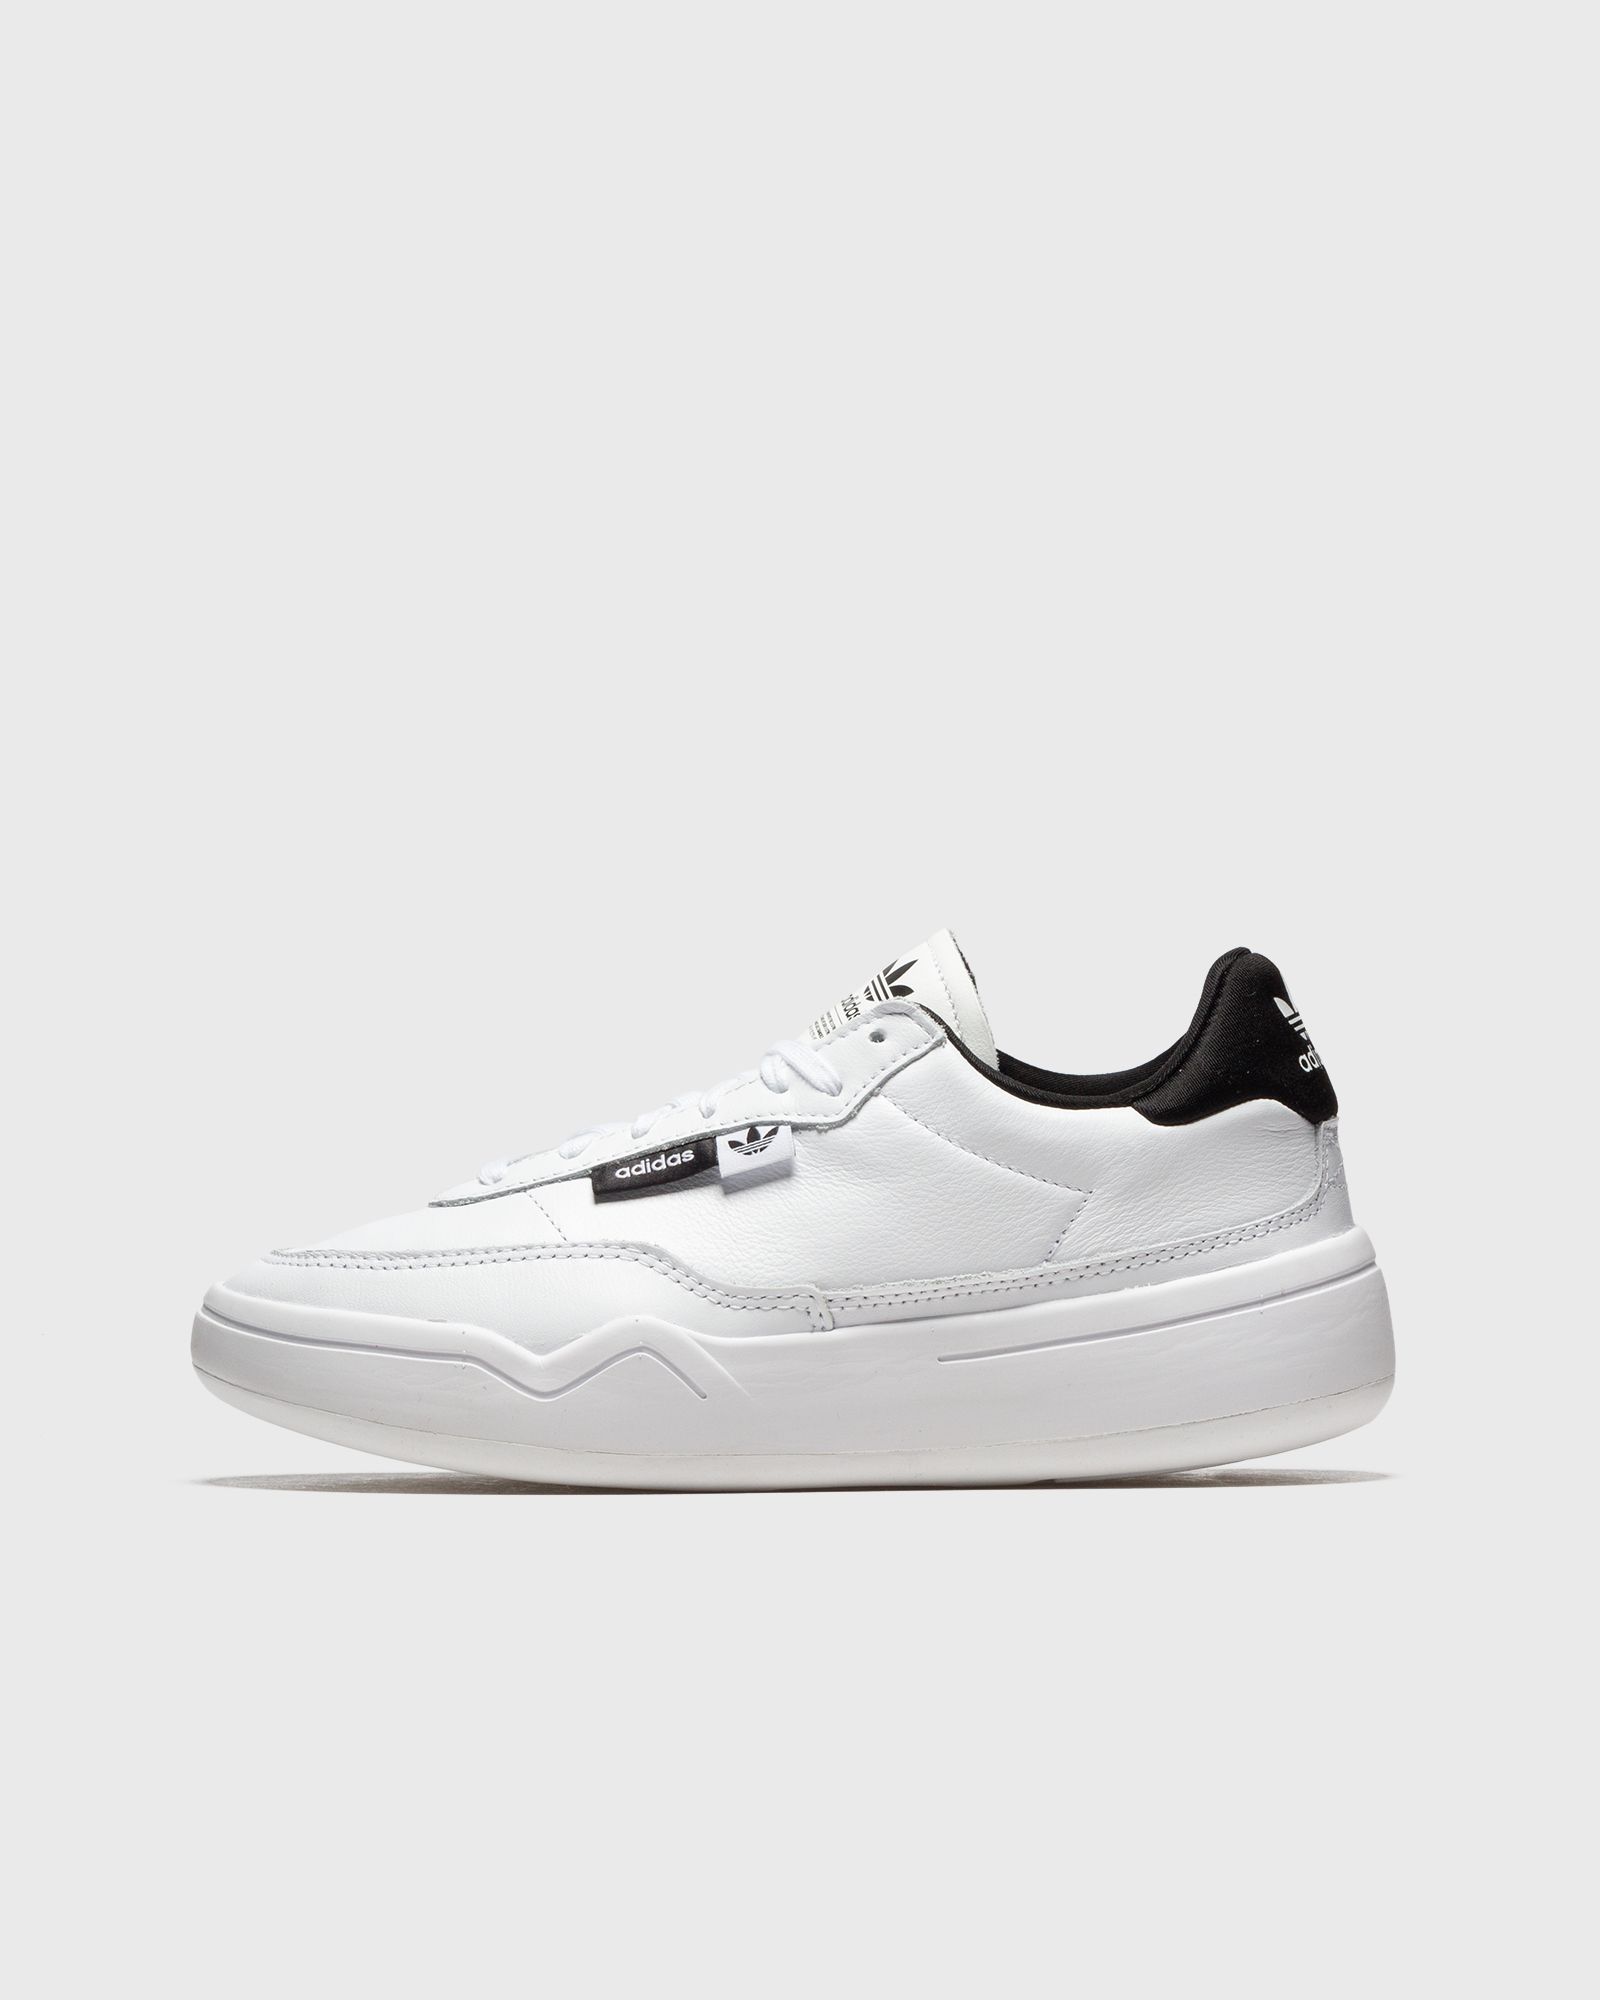 Adidas WMNS HER COURT FTWWHT/FTWWHT/CBLACK women Sneakers now available ...